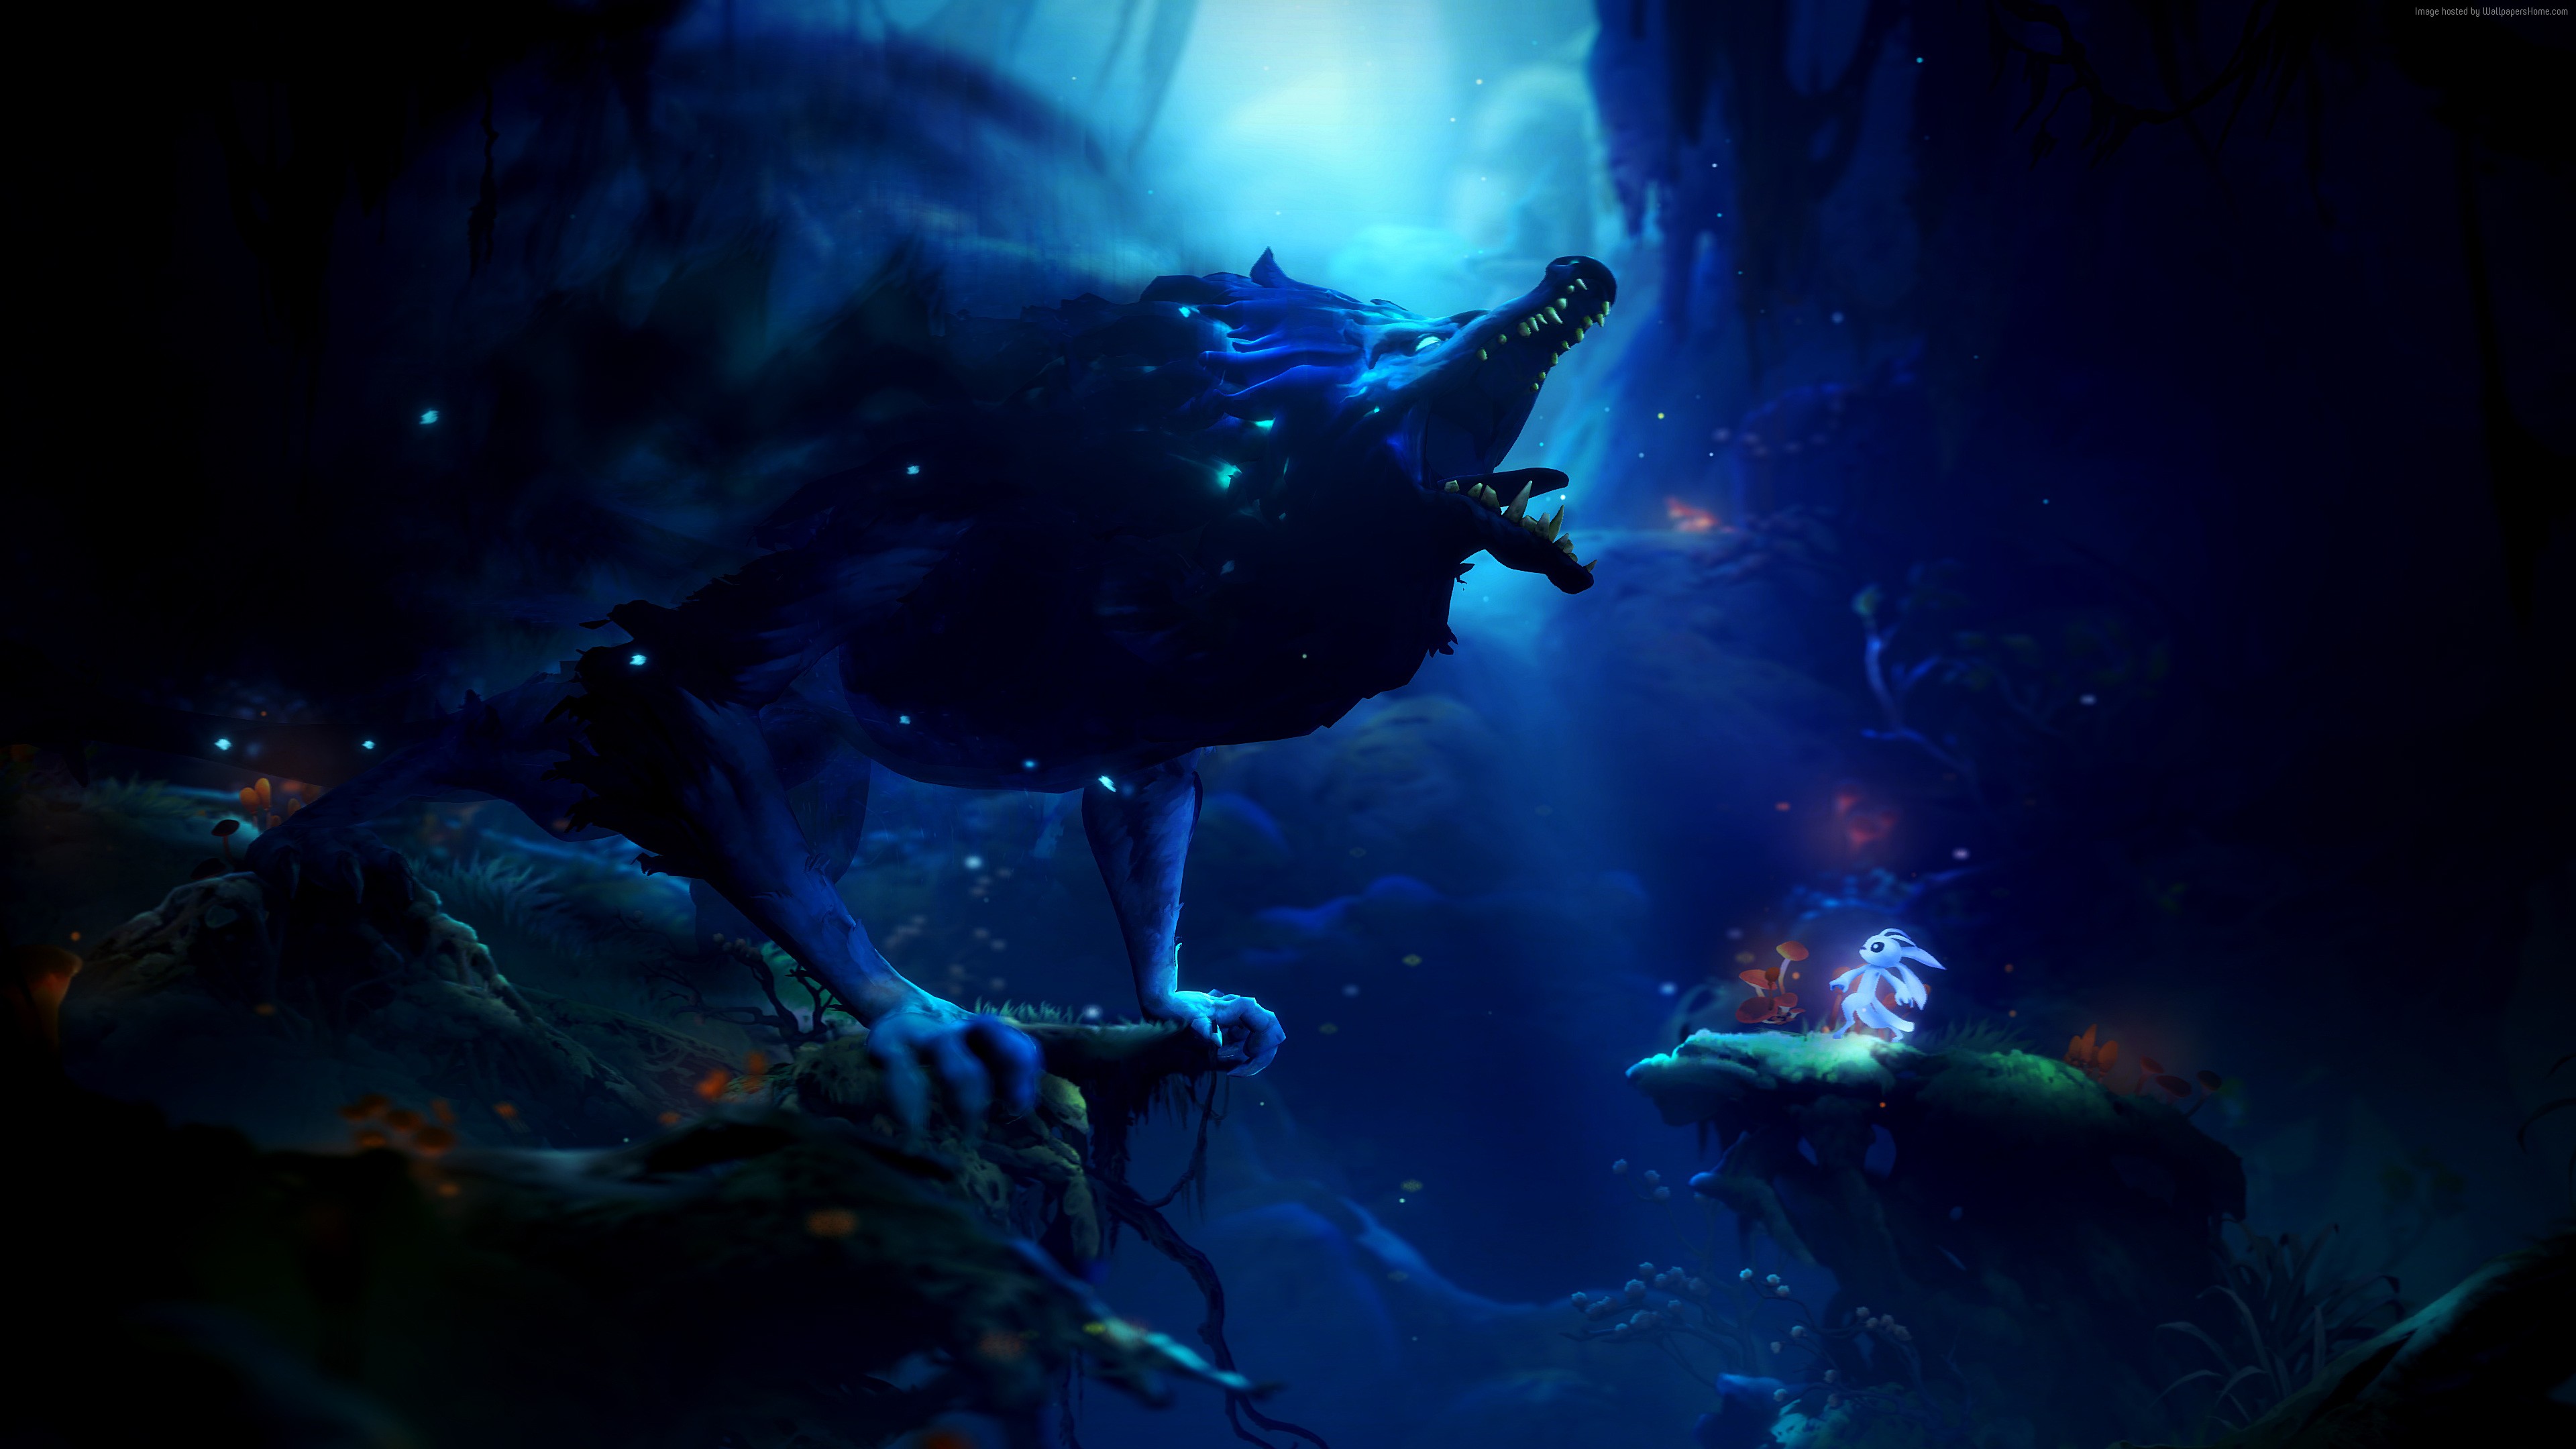 video game, ori and the will of the wisps